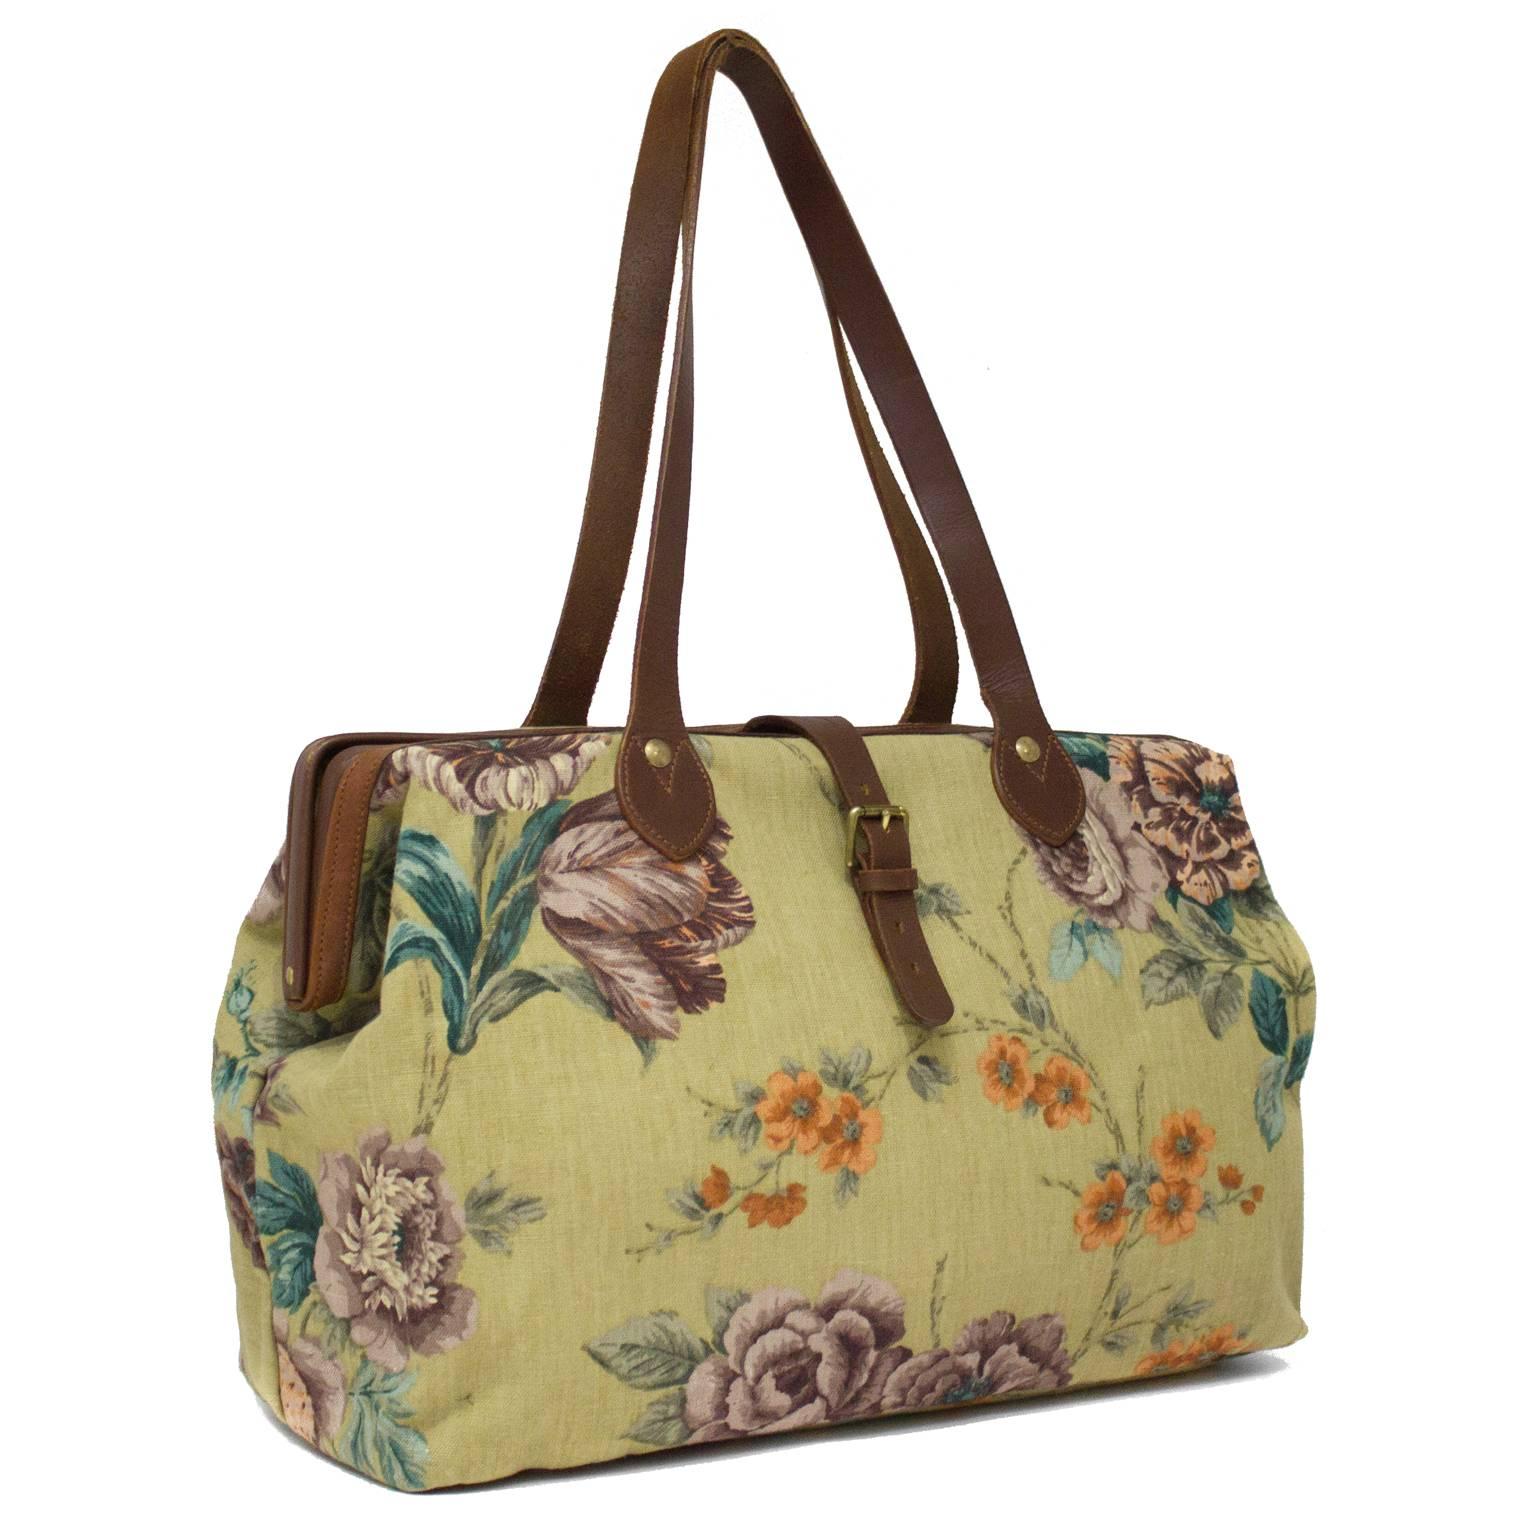 J & M Davidson mid 1980's floral printed carpet bag with overall floral design on natural canvas. In excellent condition, a perfect weekend bag for the country, plenty of space inside. Fresh and clean interior. 

Handles: 28